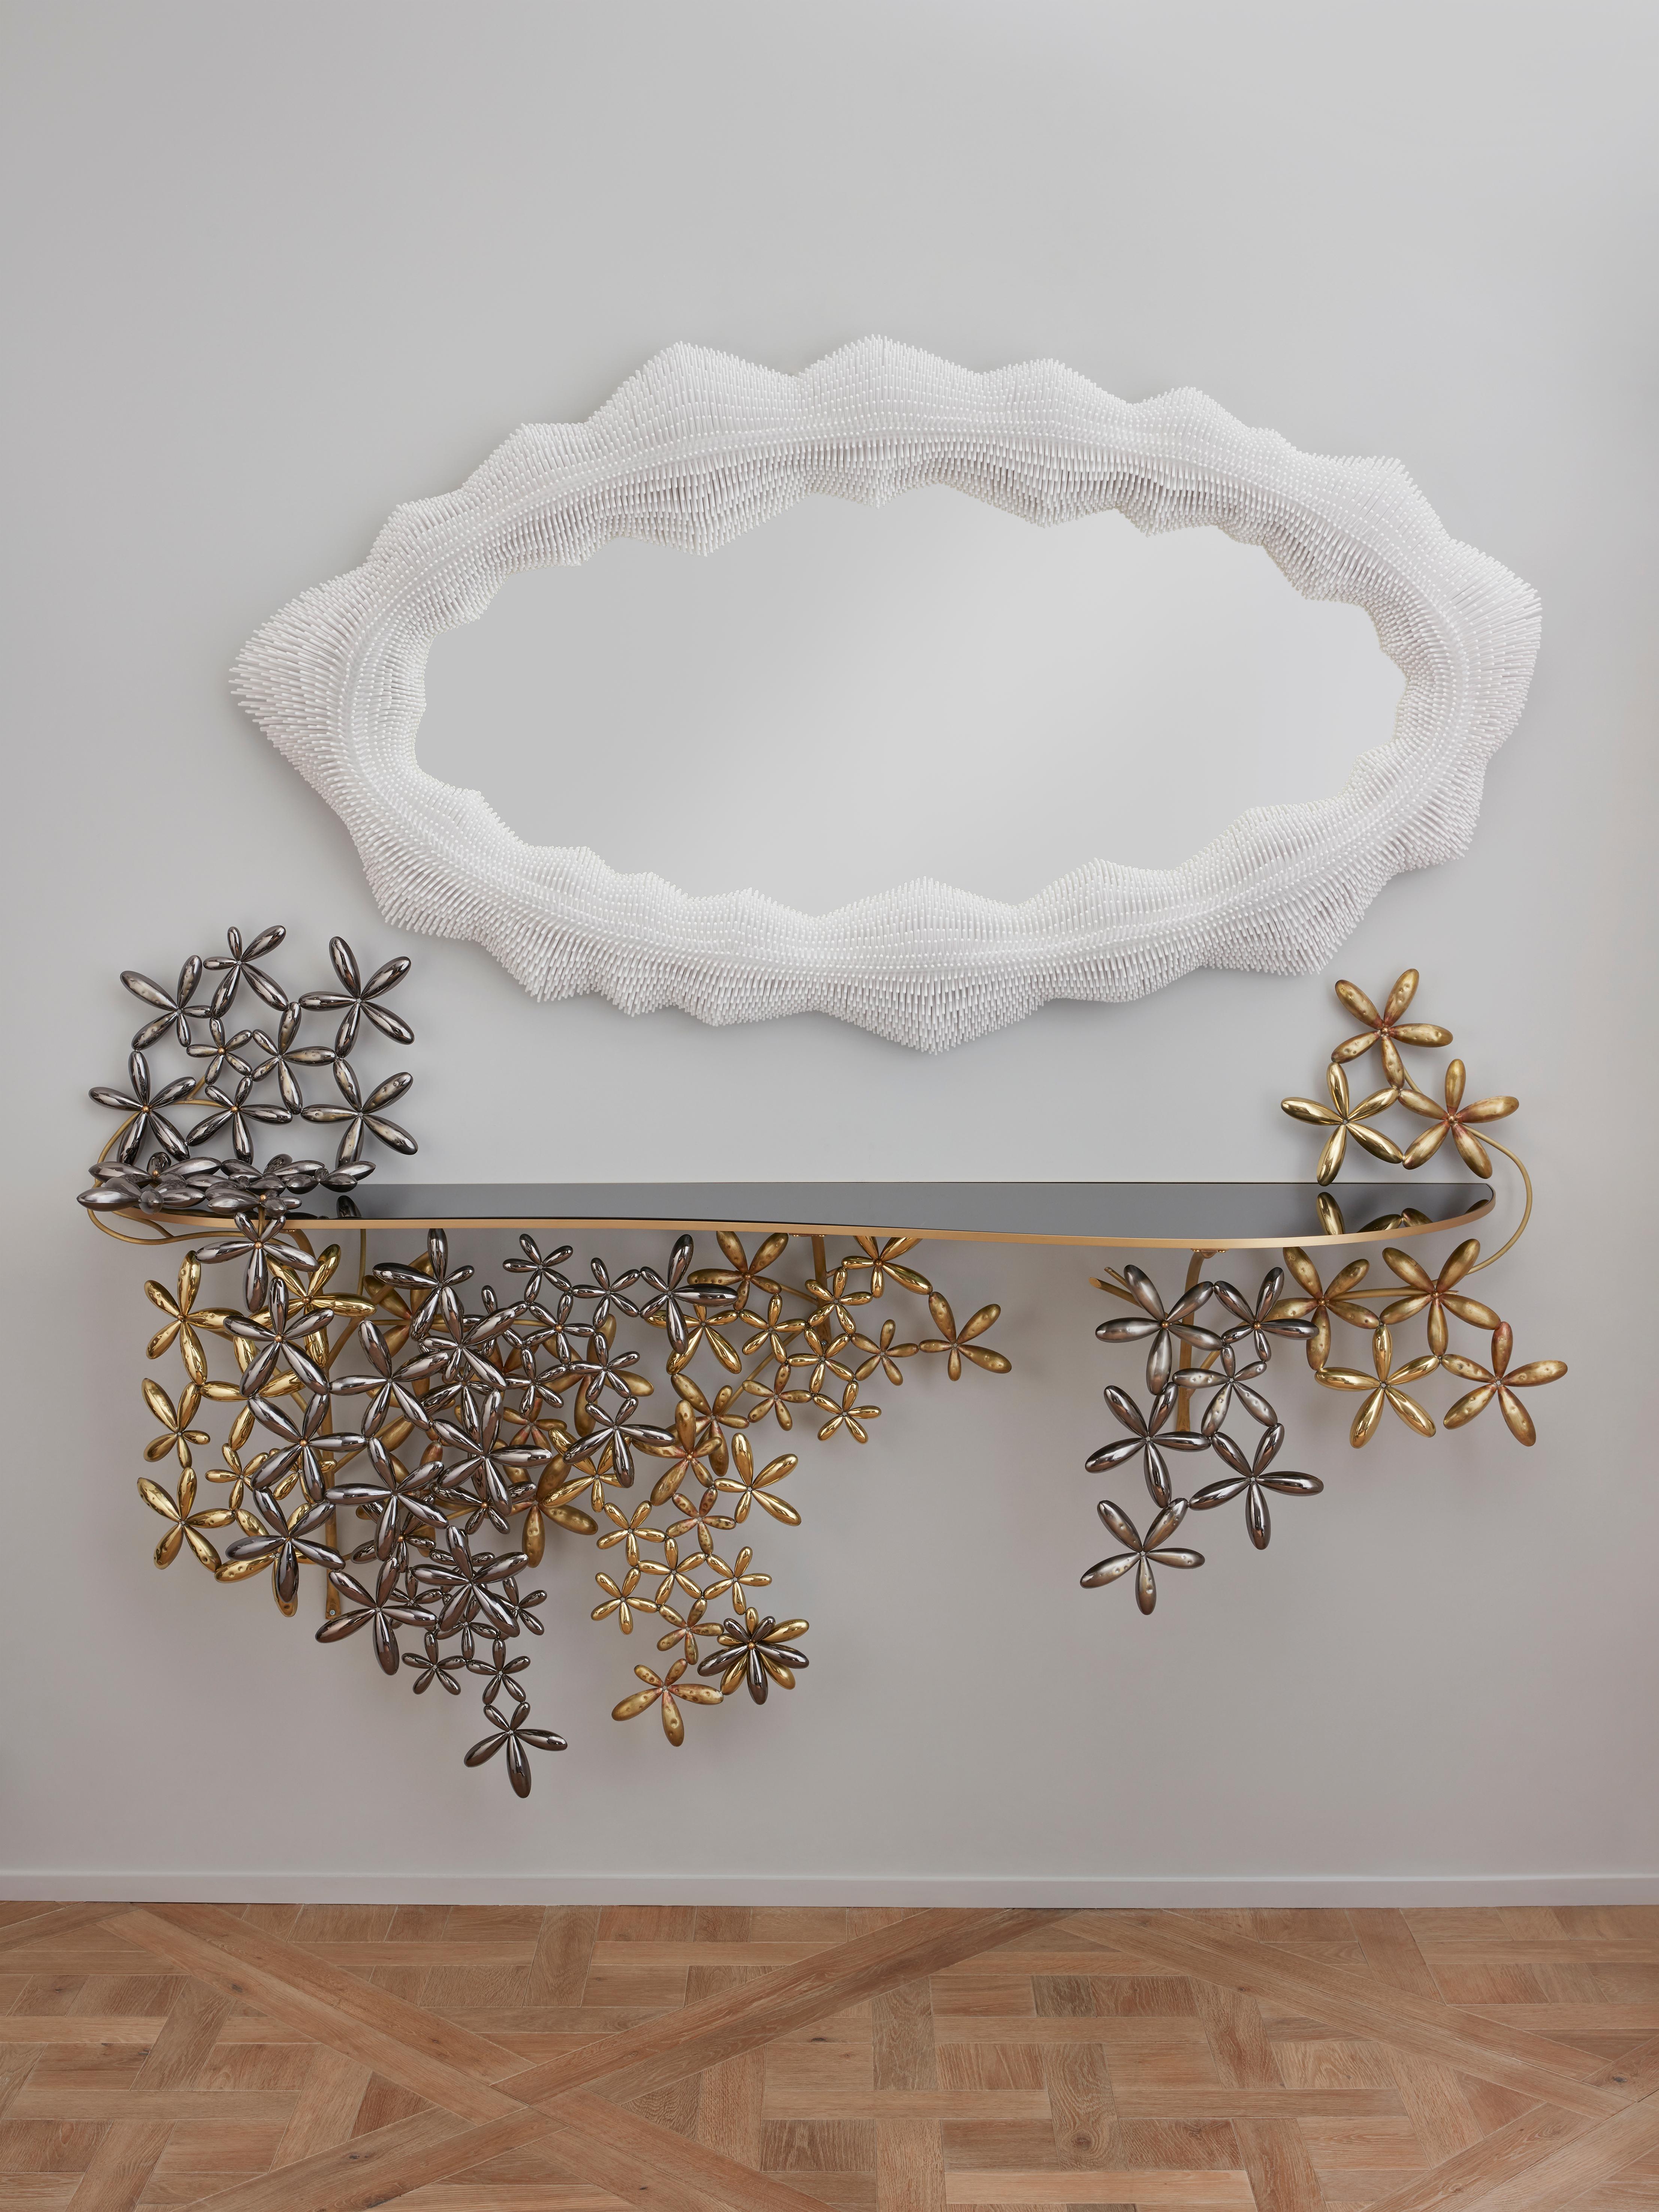 From simple beech rods that were patiently cut, sanded, arranged and lacquered, Pia Maria Raeder creates refined works which evoke biomorphic forms. Each work is handcrafted by the artist. 18,000 beech rods were necessary to produce this 'Sea